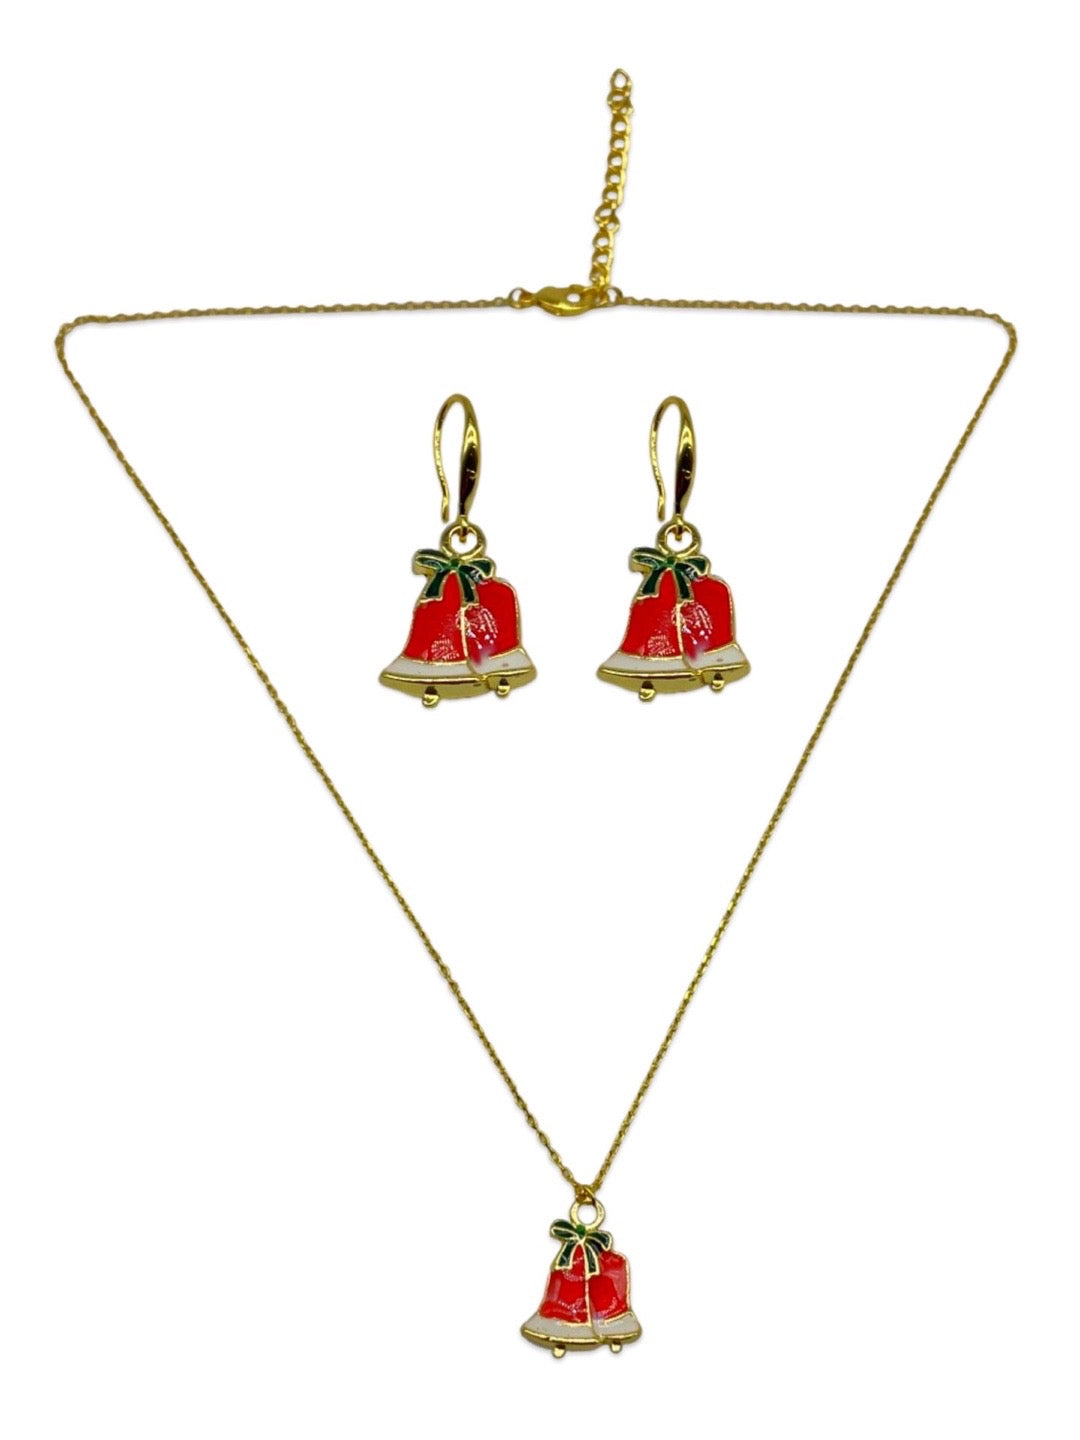 "Material: Gold Plated Brass Length: 18inch (Adjustable) Product Code: 1406NS47 Weight: 8g Country Of Origin: India "